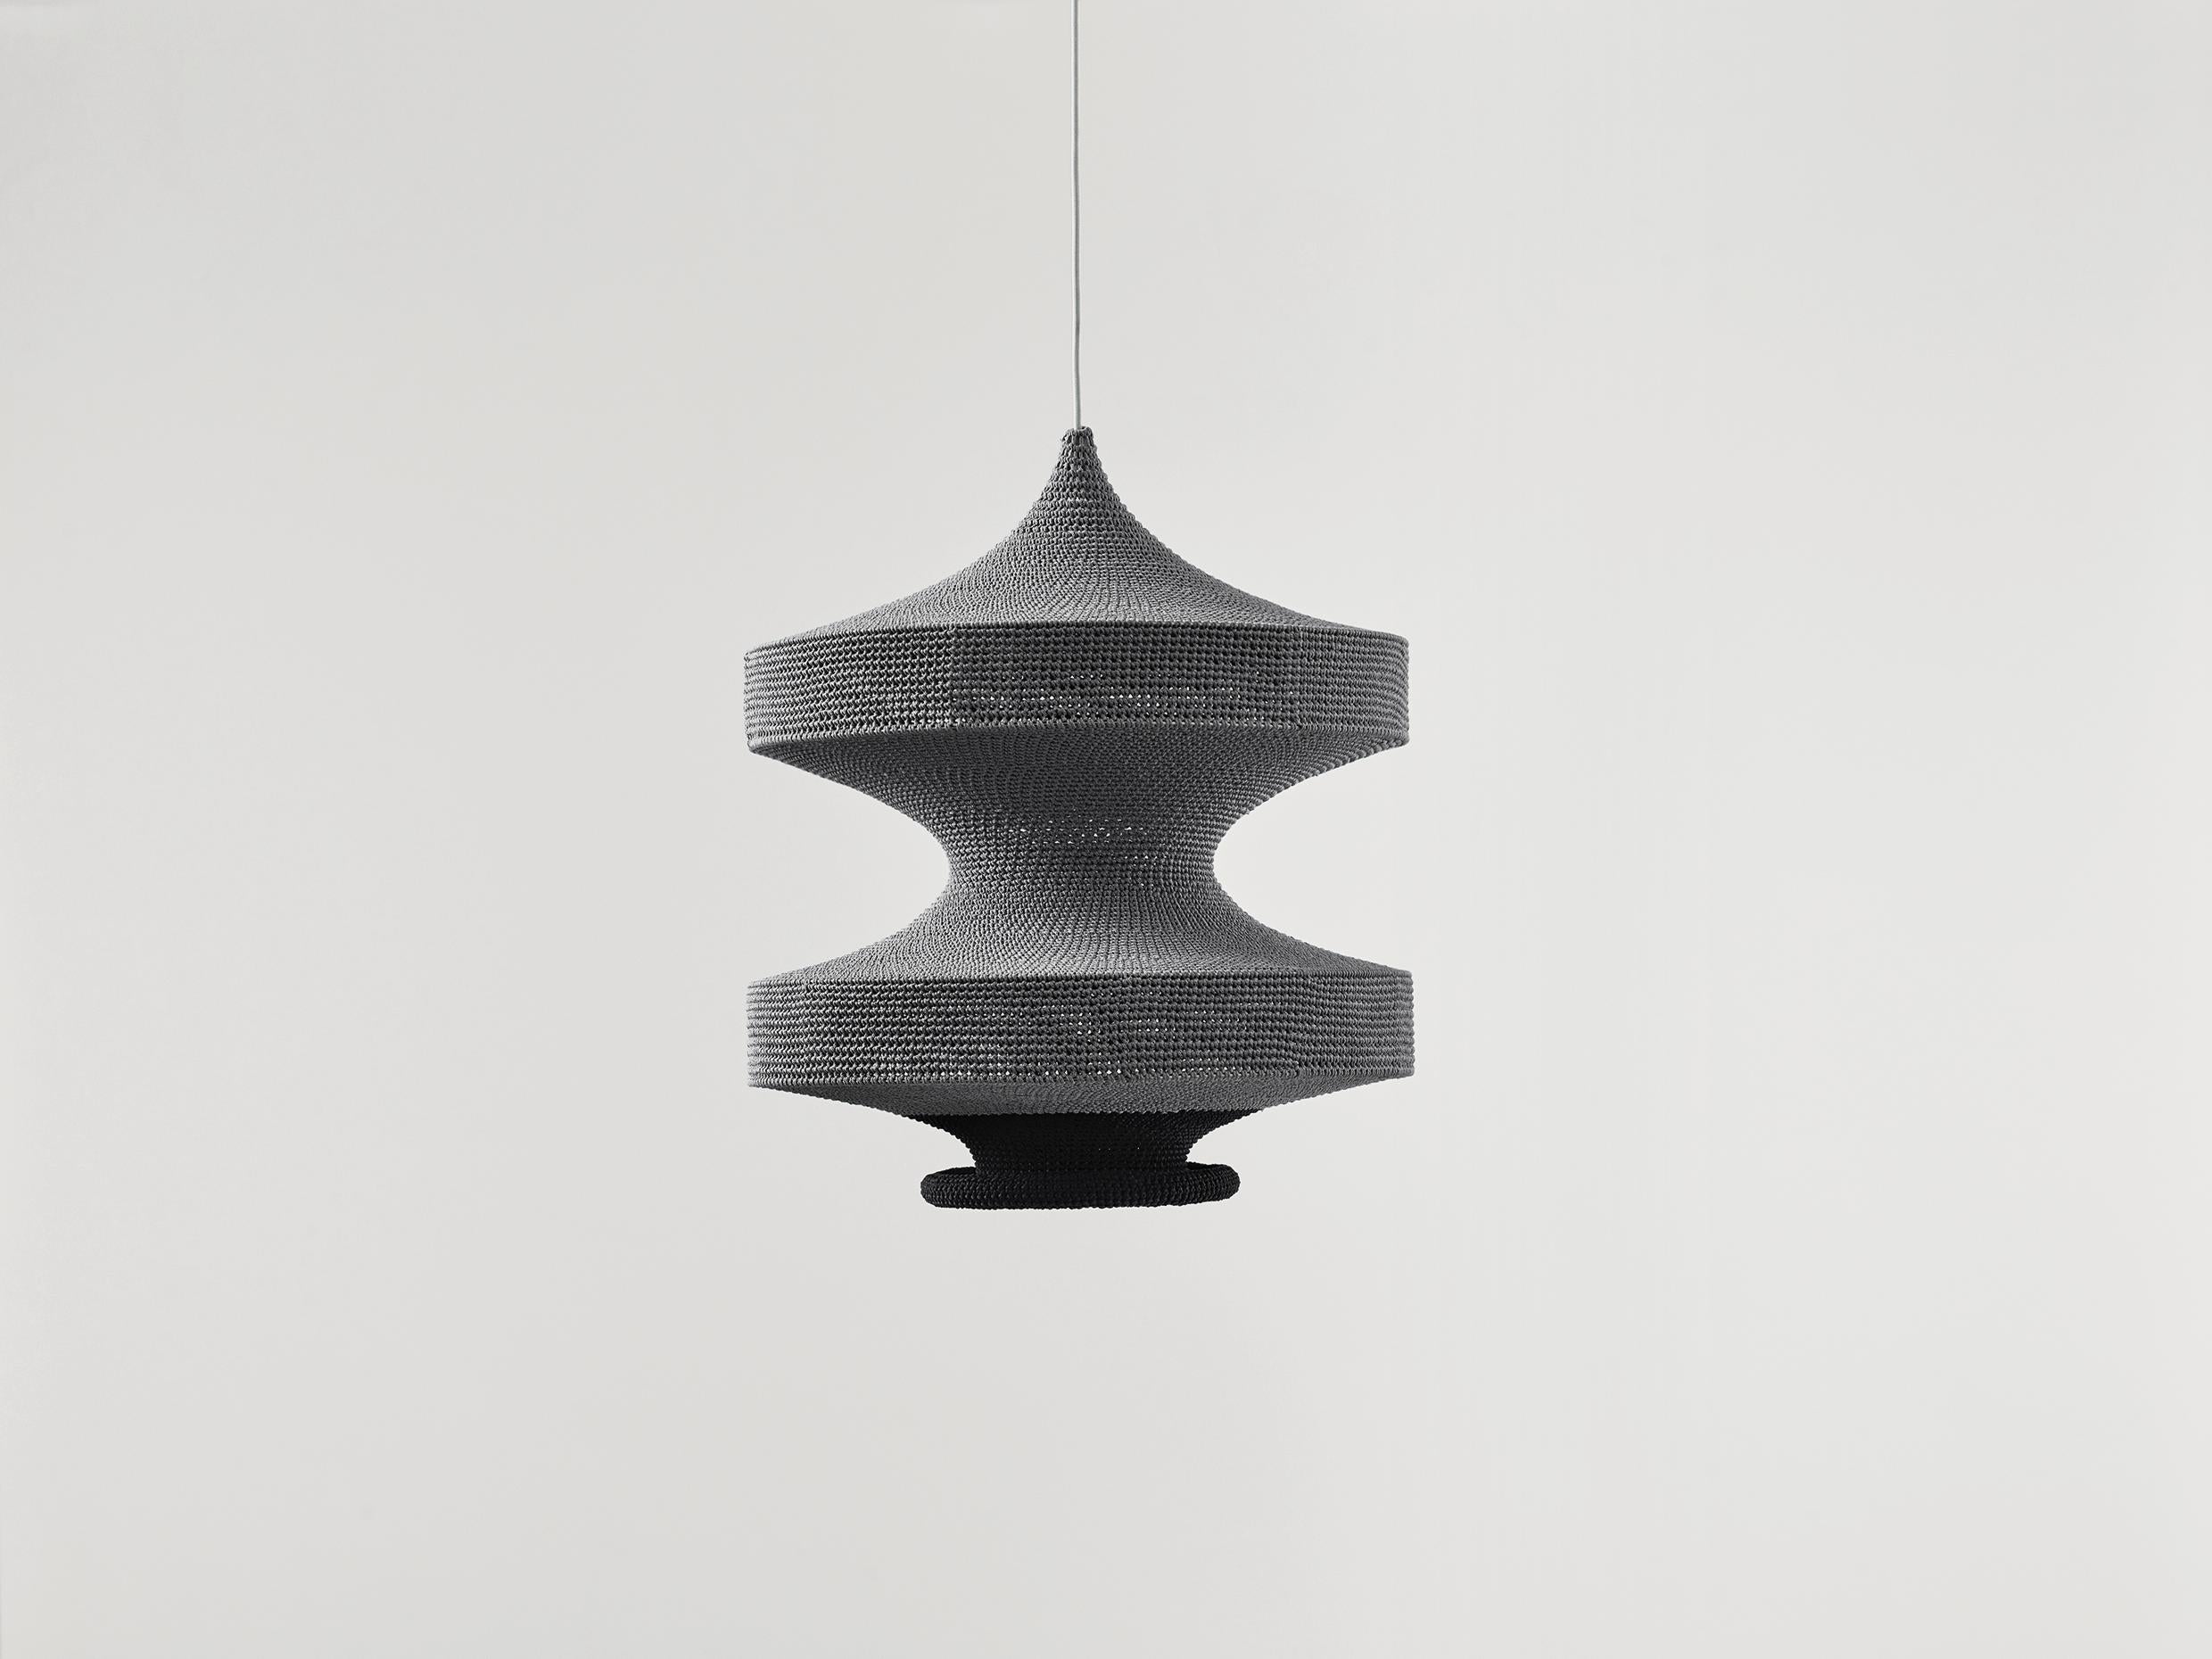 Medium Sonne pendant lamp by Naomi Paul
Dimensions: D 50 x H 60 cm.
Materials: metal frame, Egyptian cotton cord.
Color: Down Grey with Black lower.
Available in other colors and in 3 sizes: D32, D50, D60 cm.
Available in plain or two tone